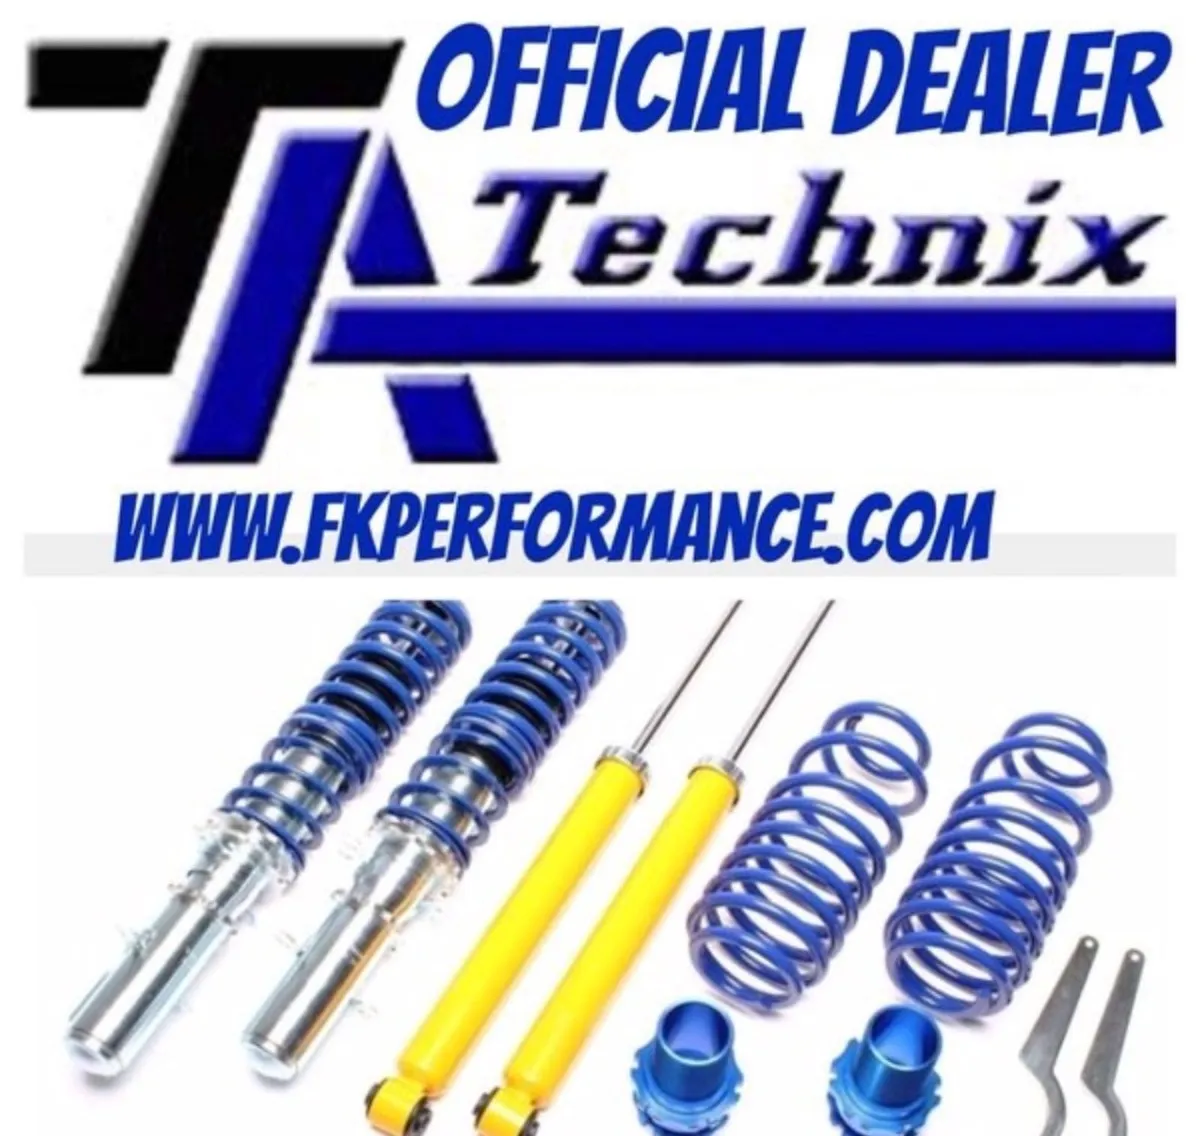 Coilover kit specials